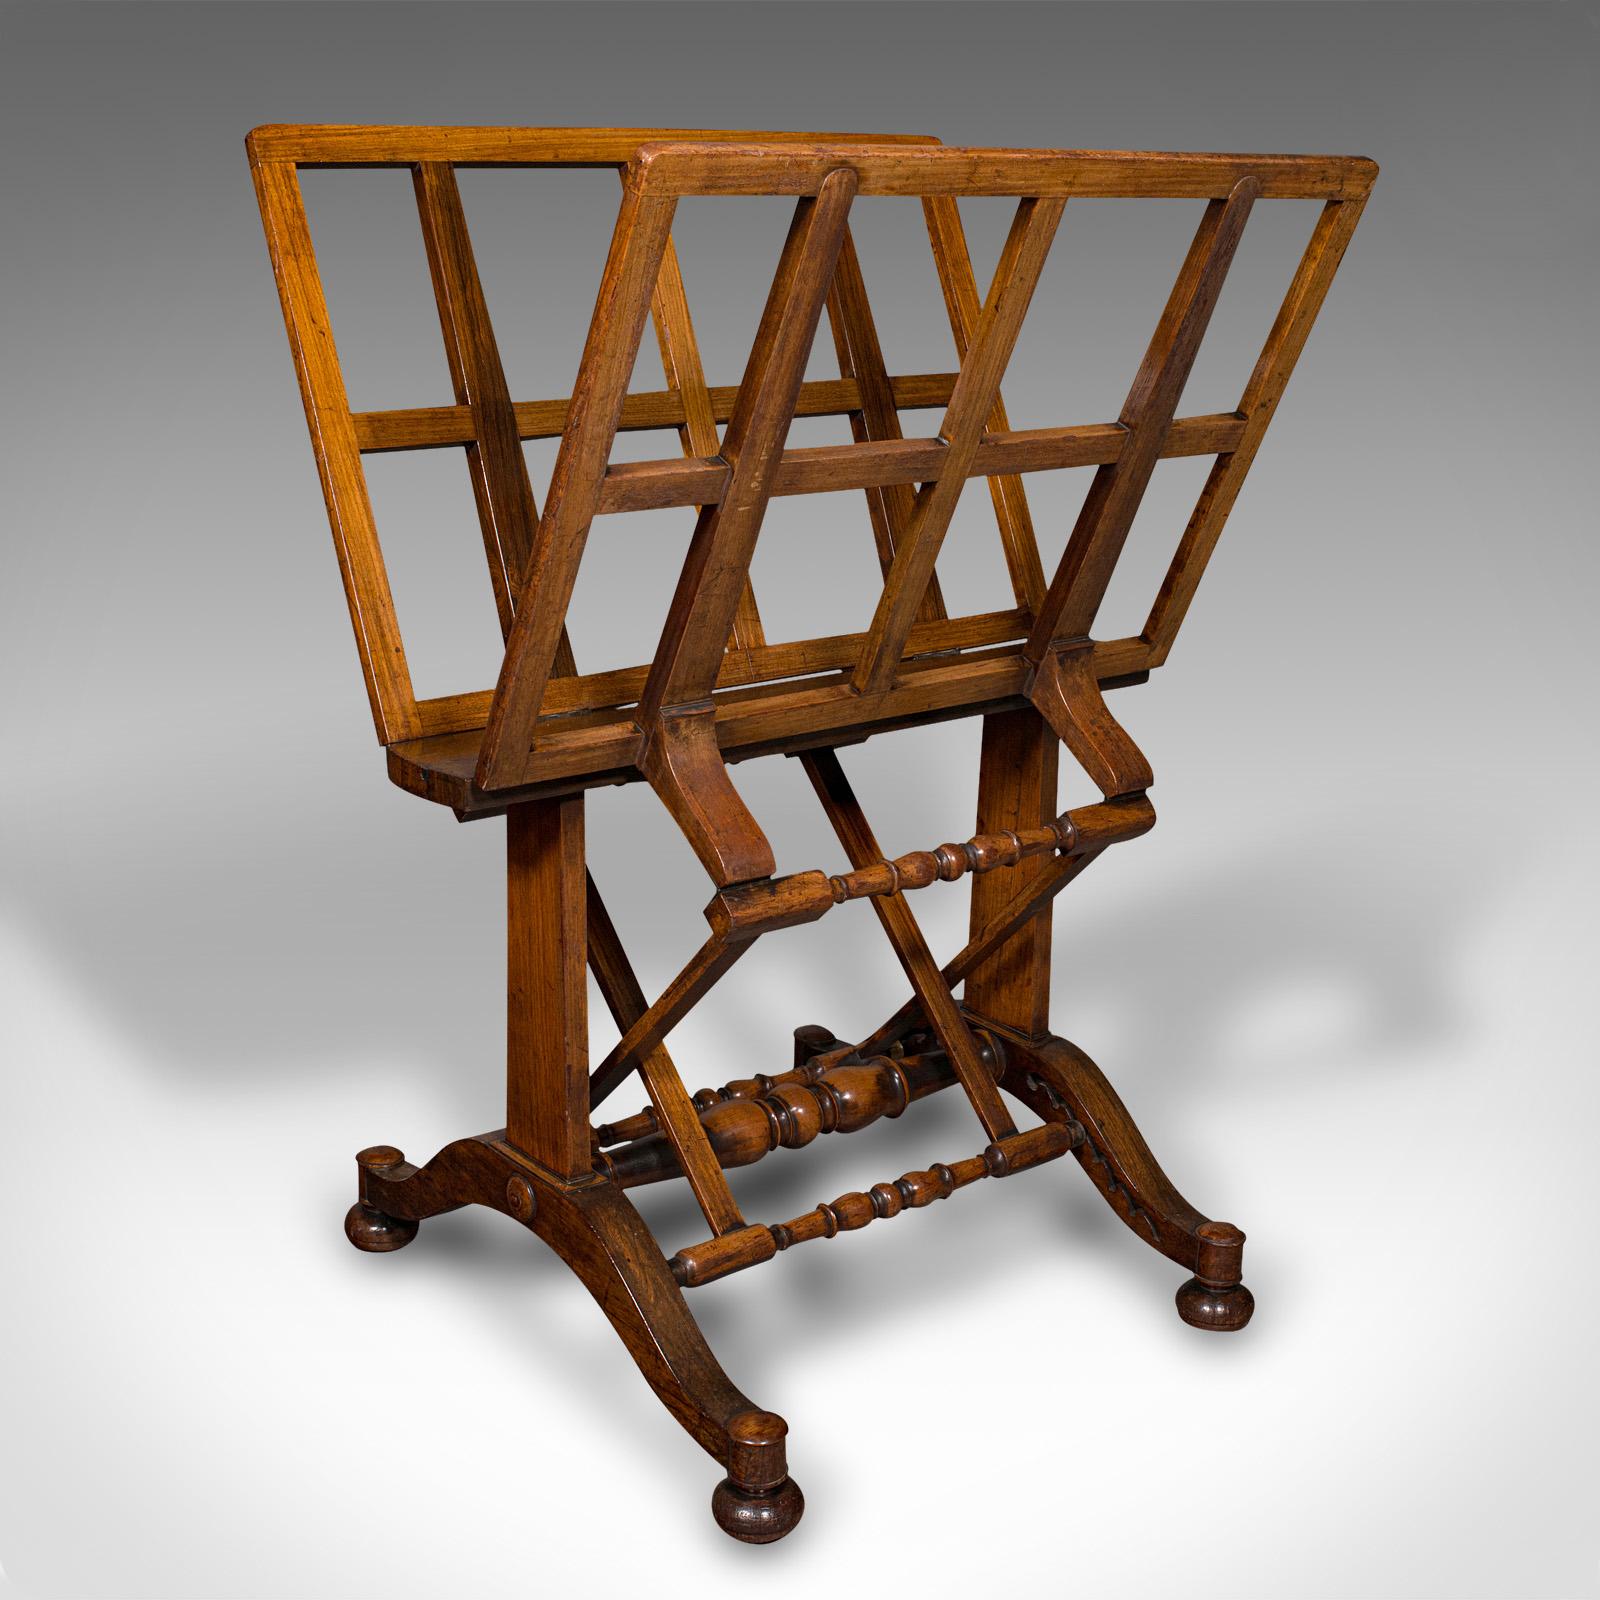 This is an antique artist's folio stand. An English, rosewood adjustable architect's picture rack, dating to the Regency period, circa 1820.

Superb storage, ideal for the prolific artist or collector
Displaying a desirable aged patina and in